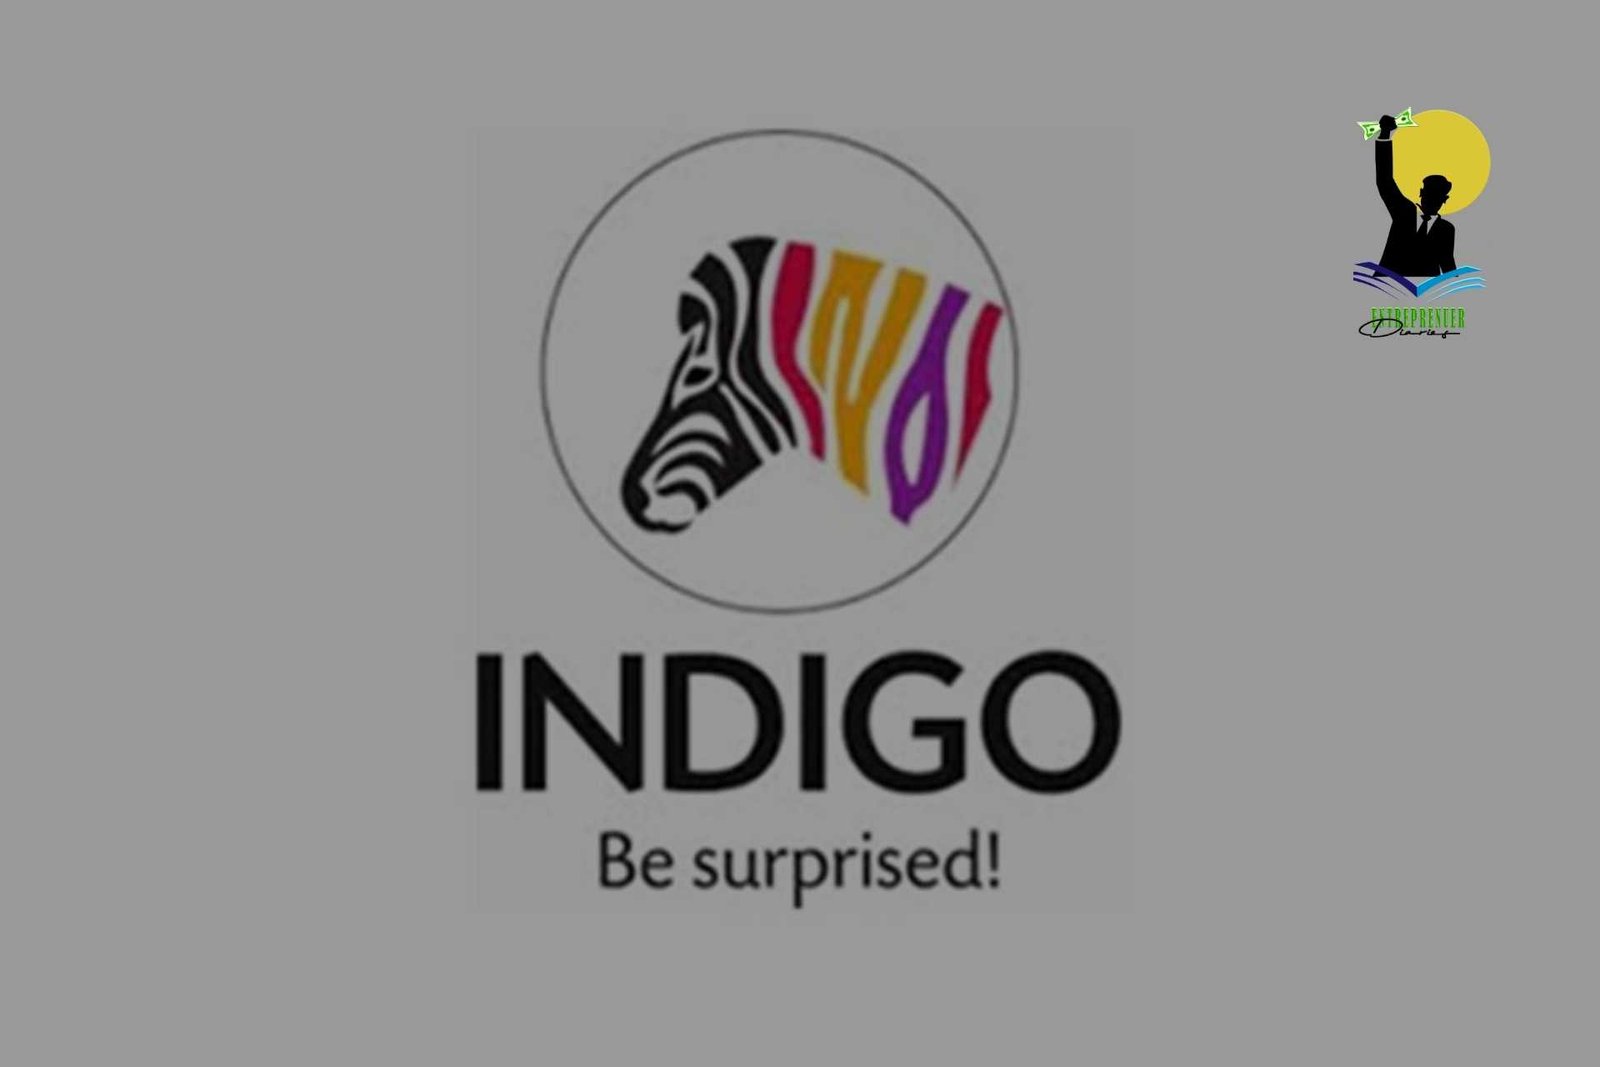 Indigo Paints made the bumper stock market start-up, which included 75% premium